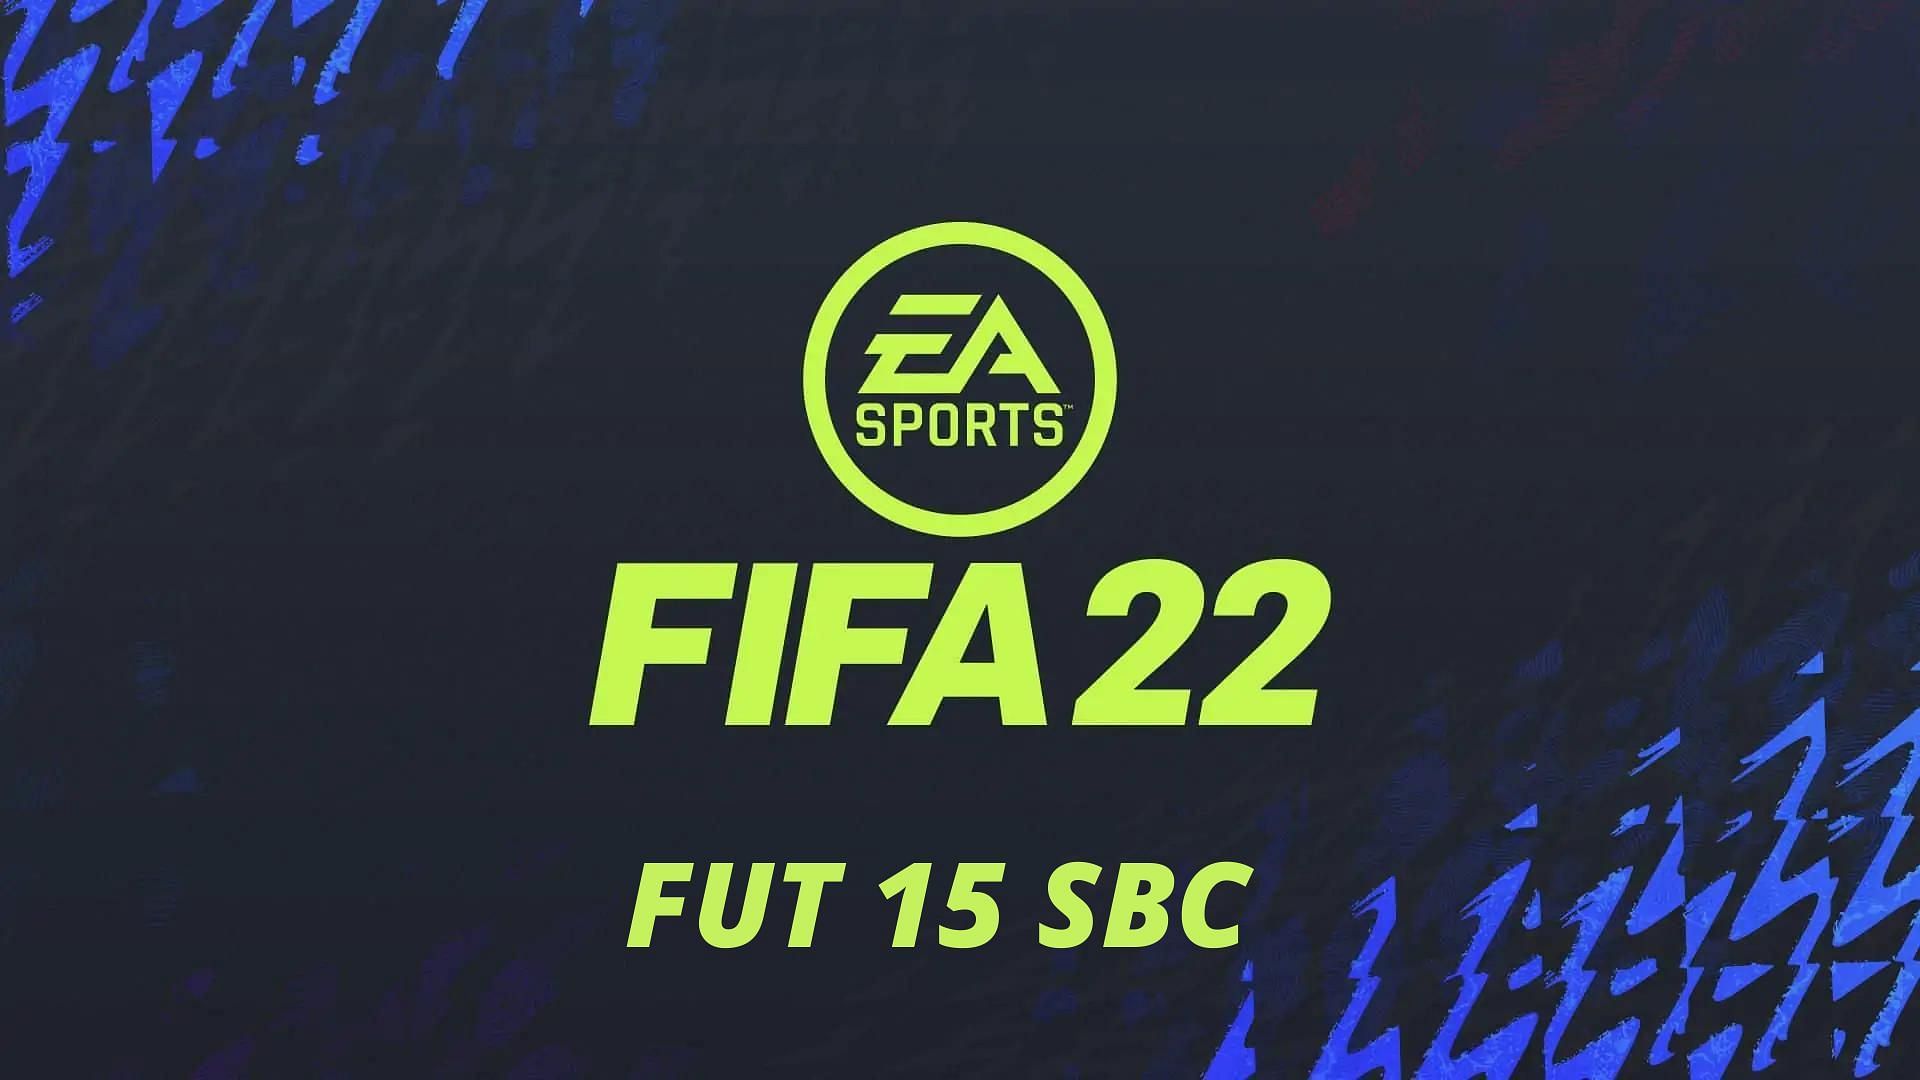 FIFA 22 Ultimate Team: How to complete the FUT 15 SBC in FUT 22